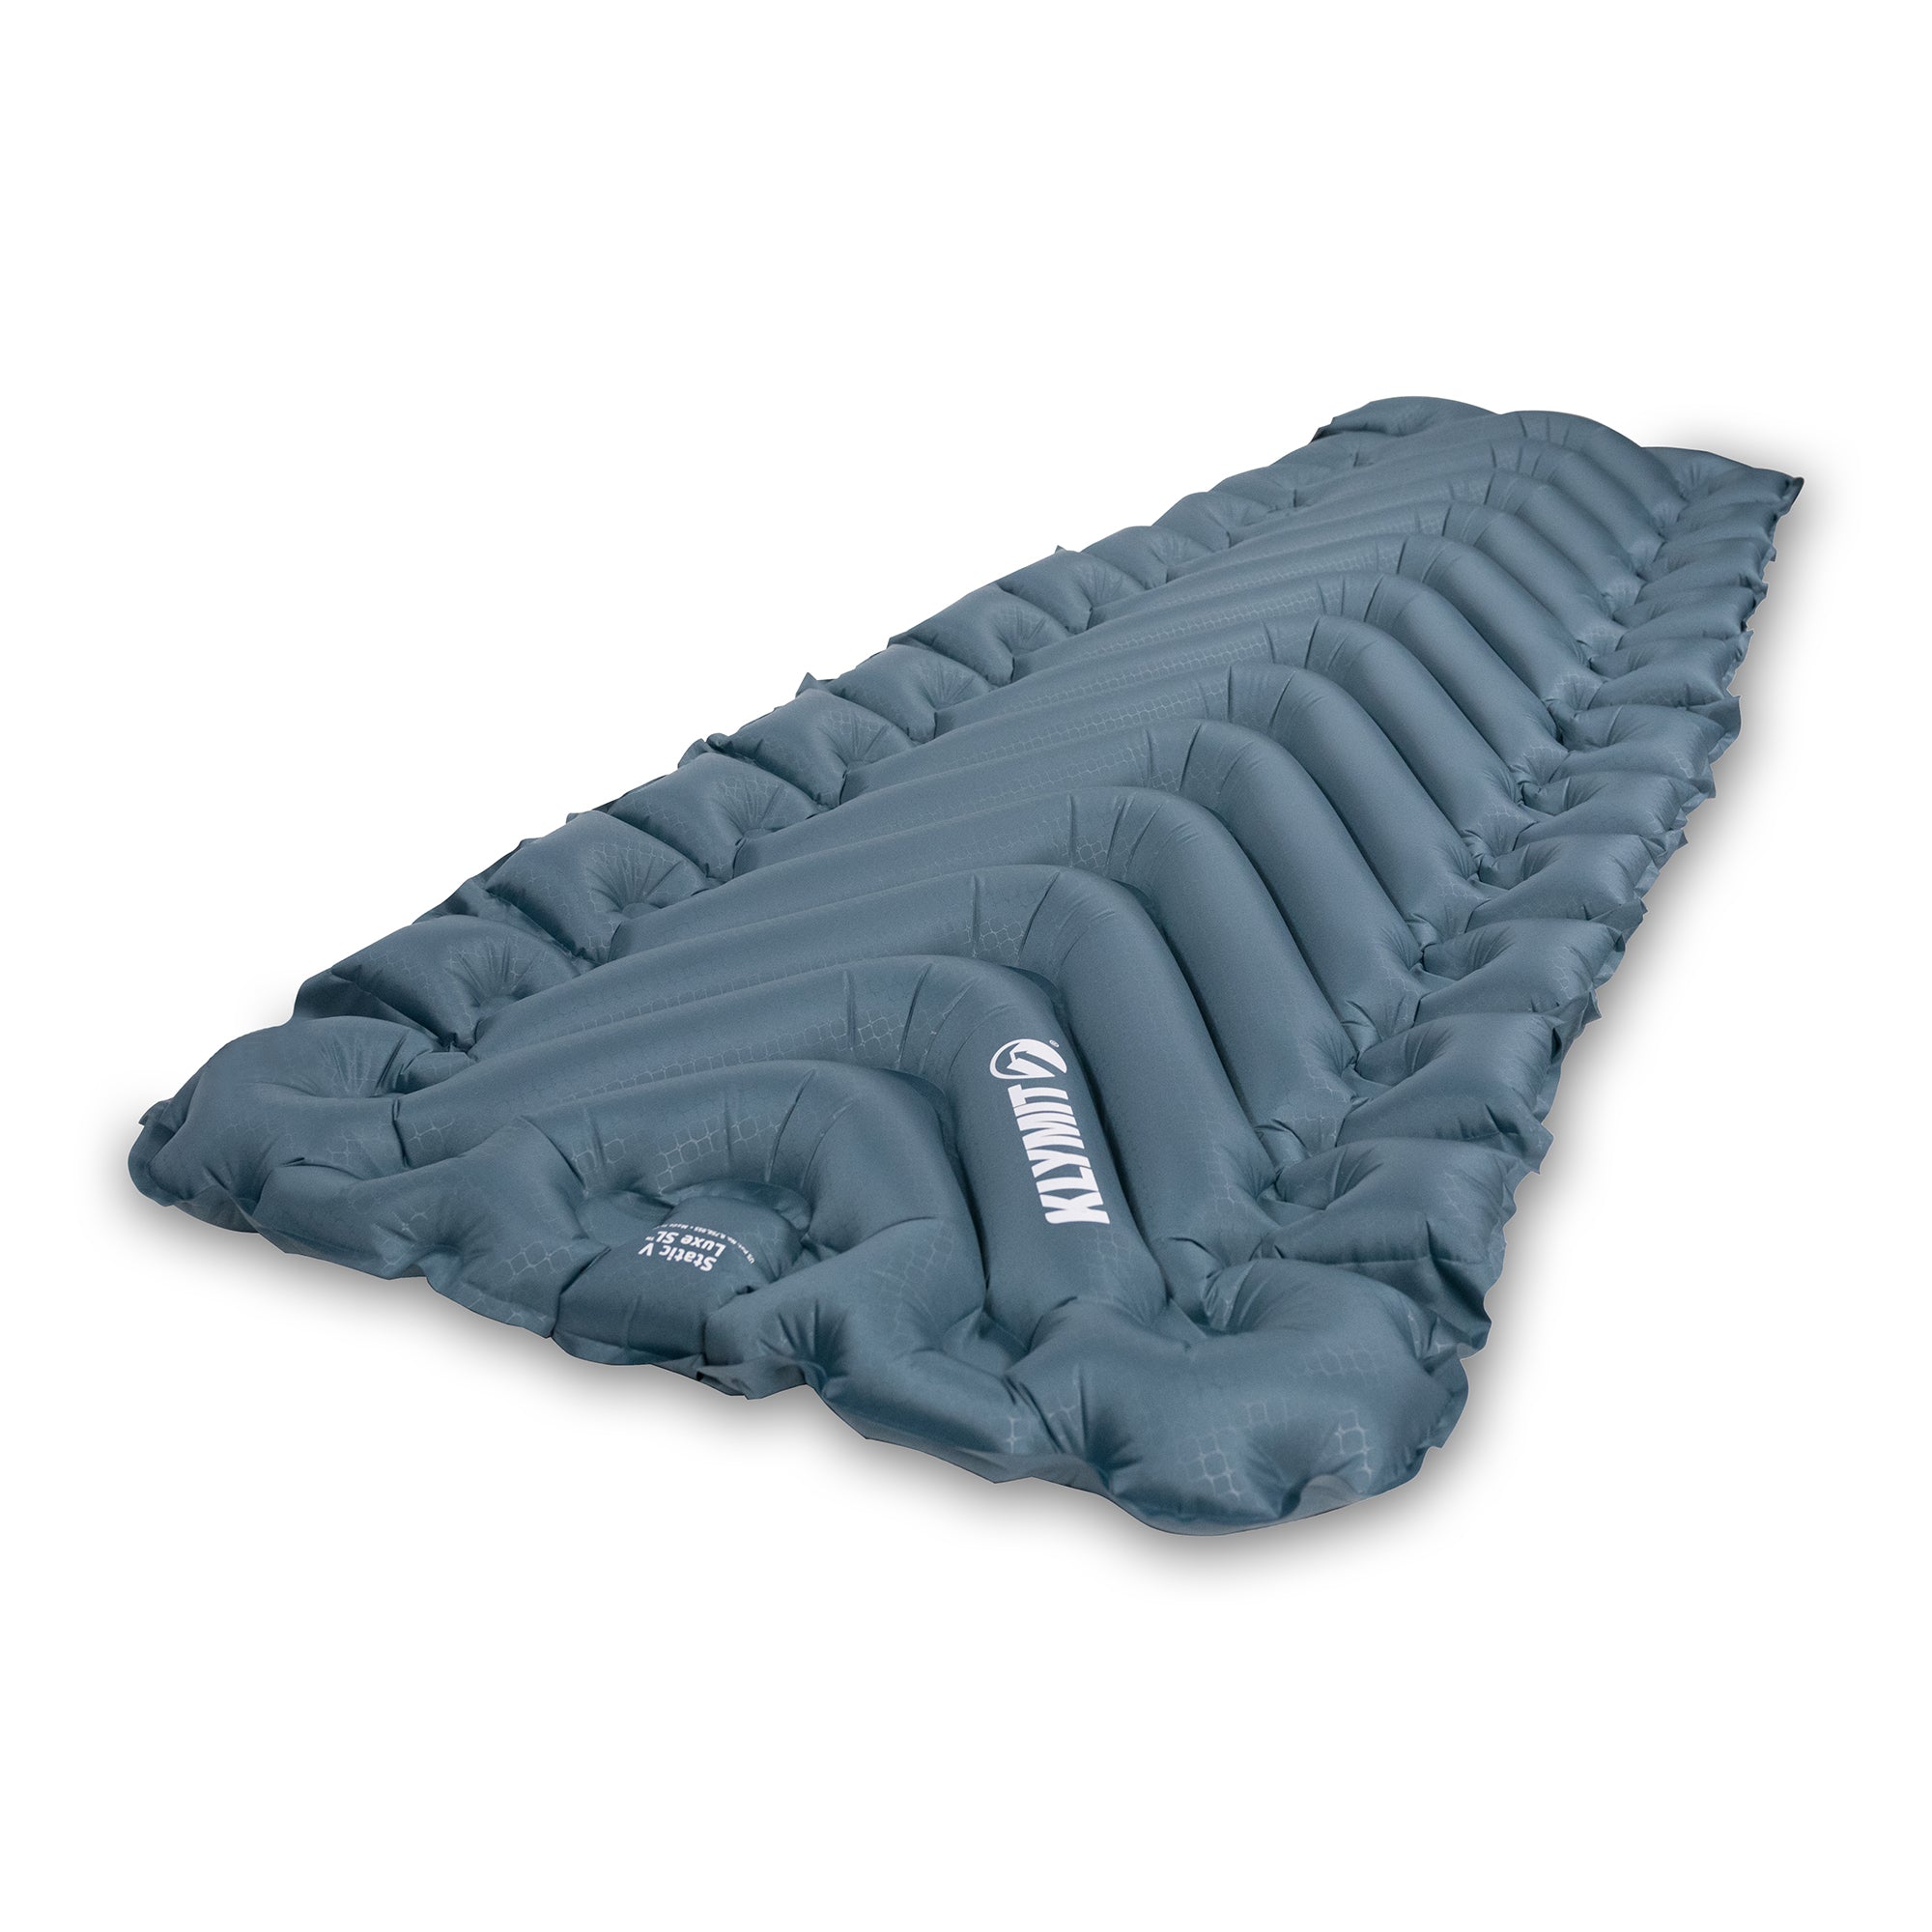 Static V Luxe SL Sleeping Pads